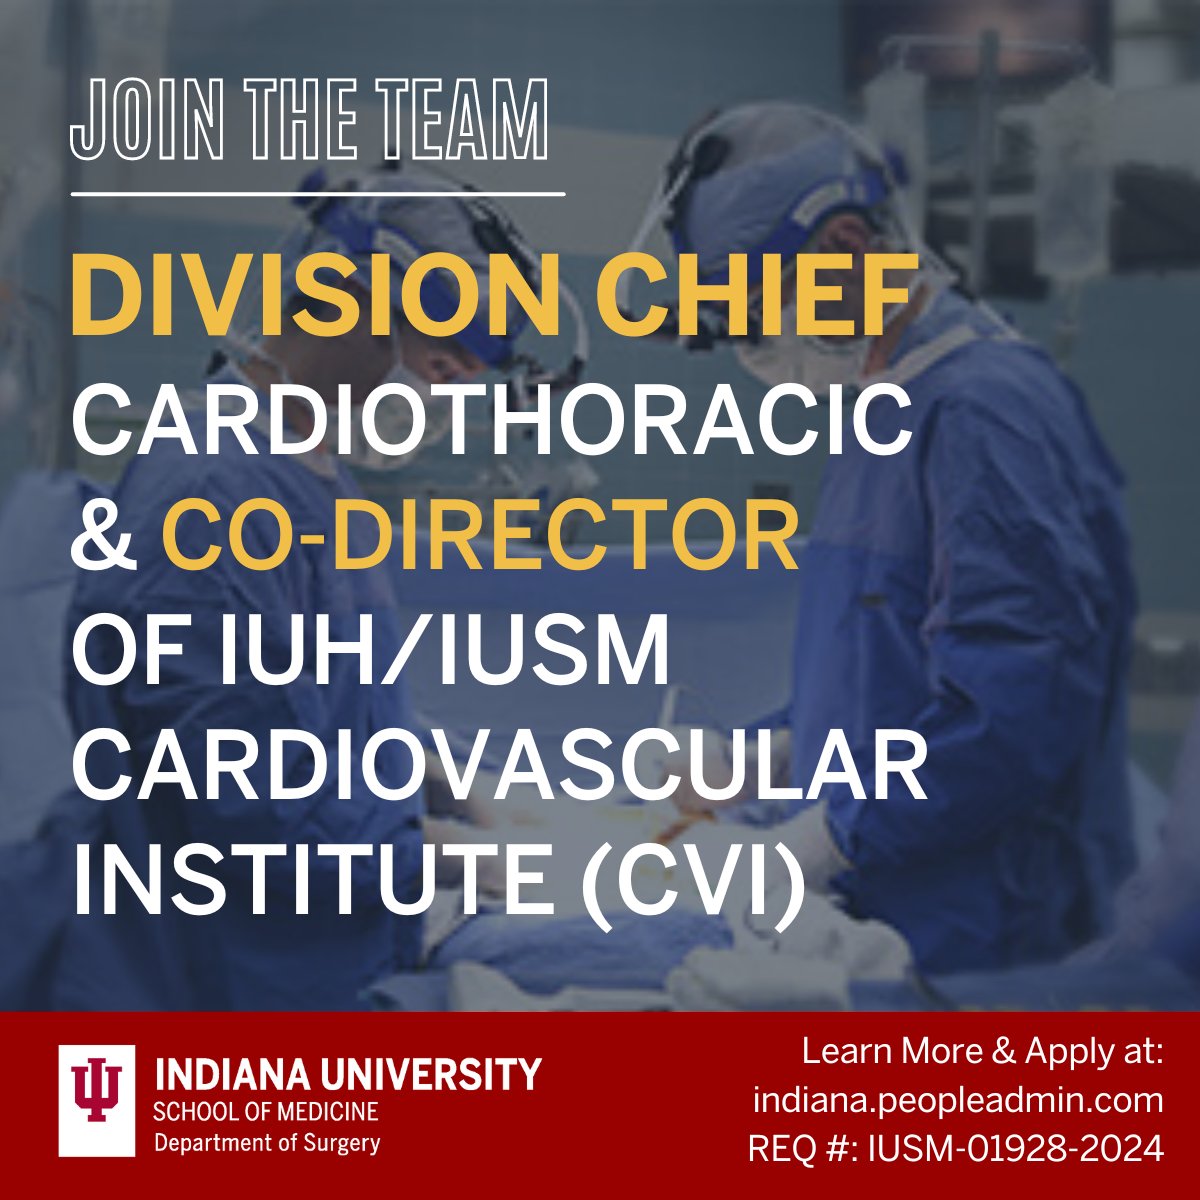 📢Major Leadership Opportunity in Cardiothoracic! Come join the team at Indiana University School of Medicine (IUSM) as the Division Chief of Cardiothoracic and Co-Director of the IUH/IUSM Cardiovascular Institute (CVI). We are seeking a visionary leader to guide our faculty in